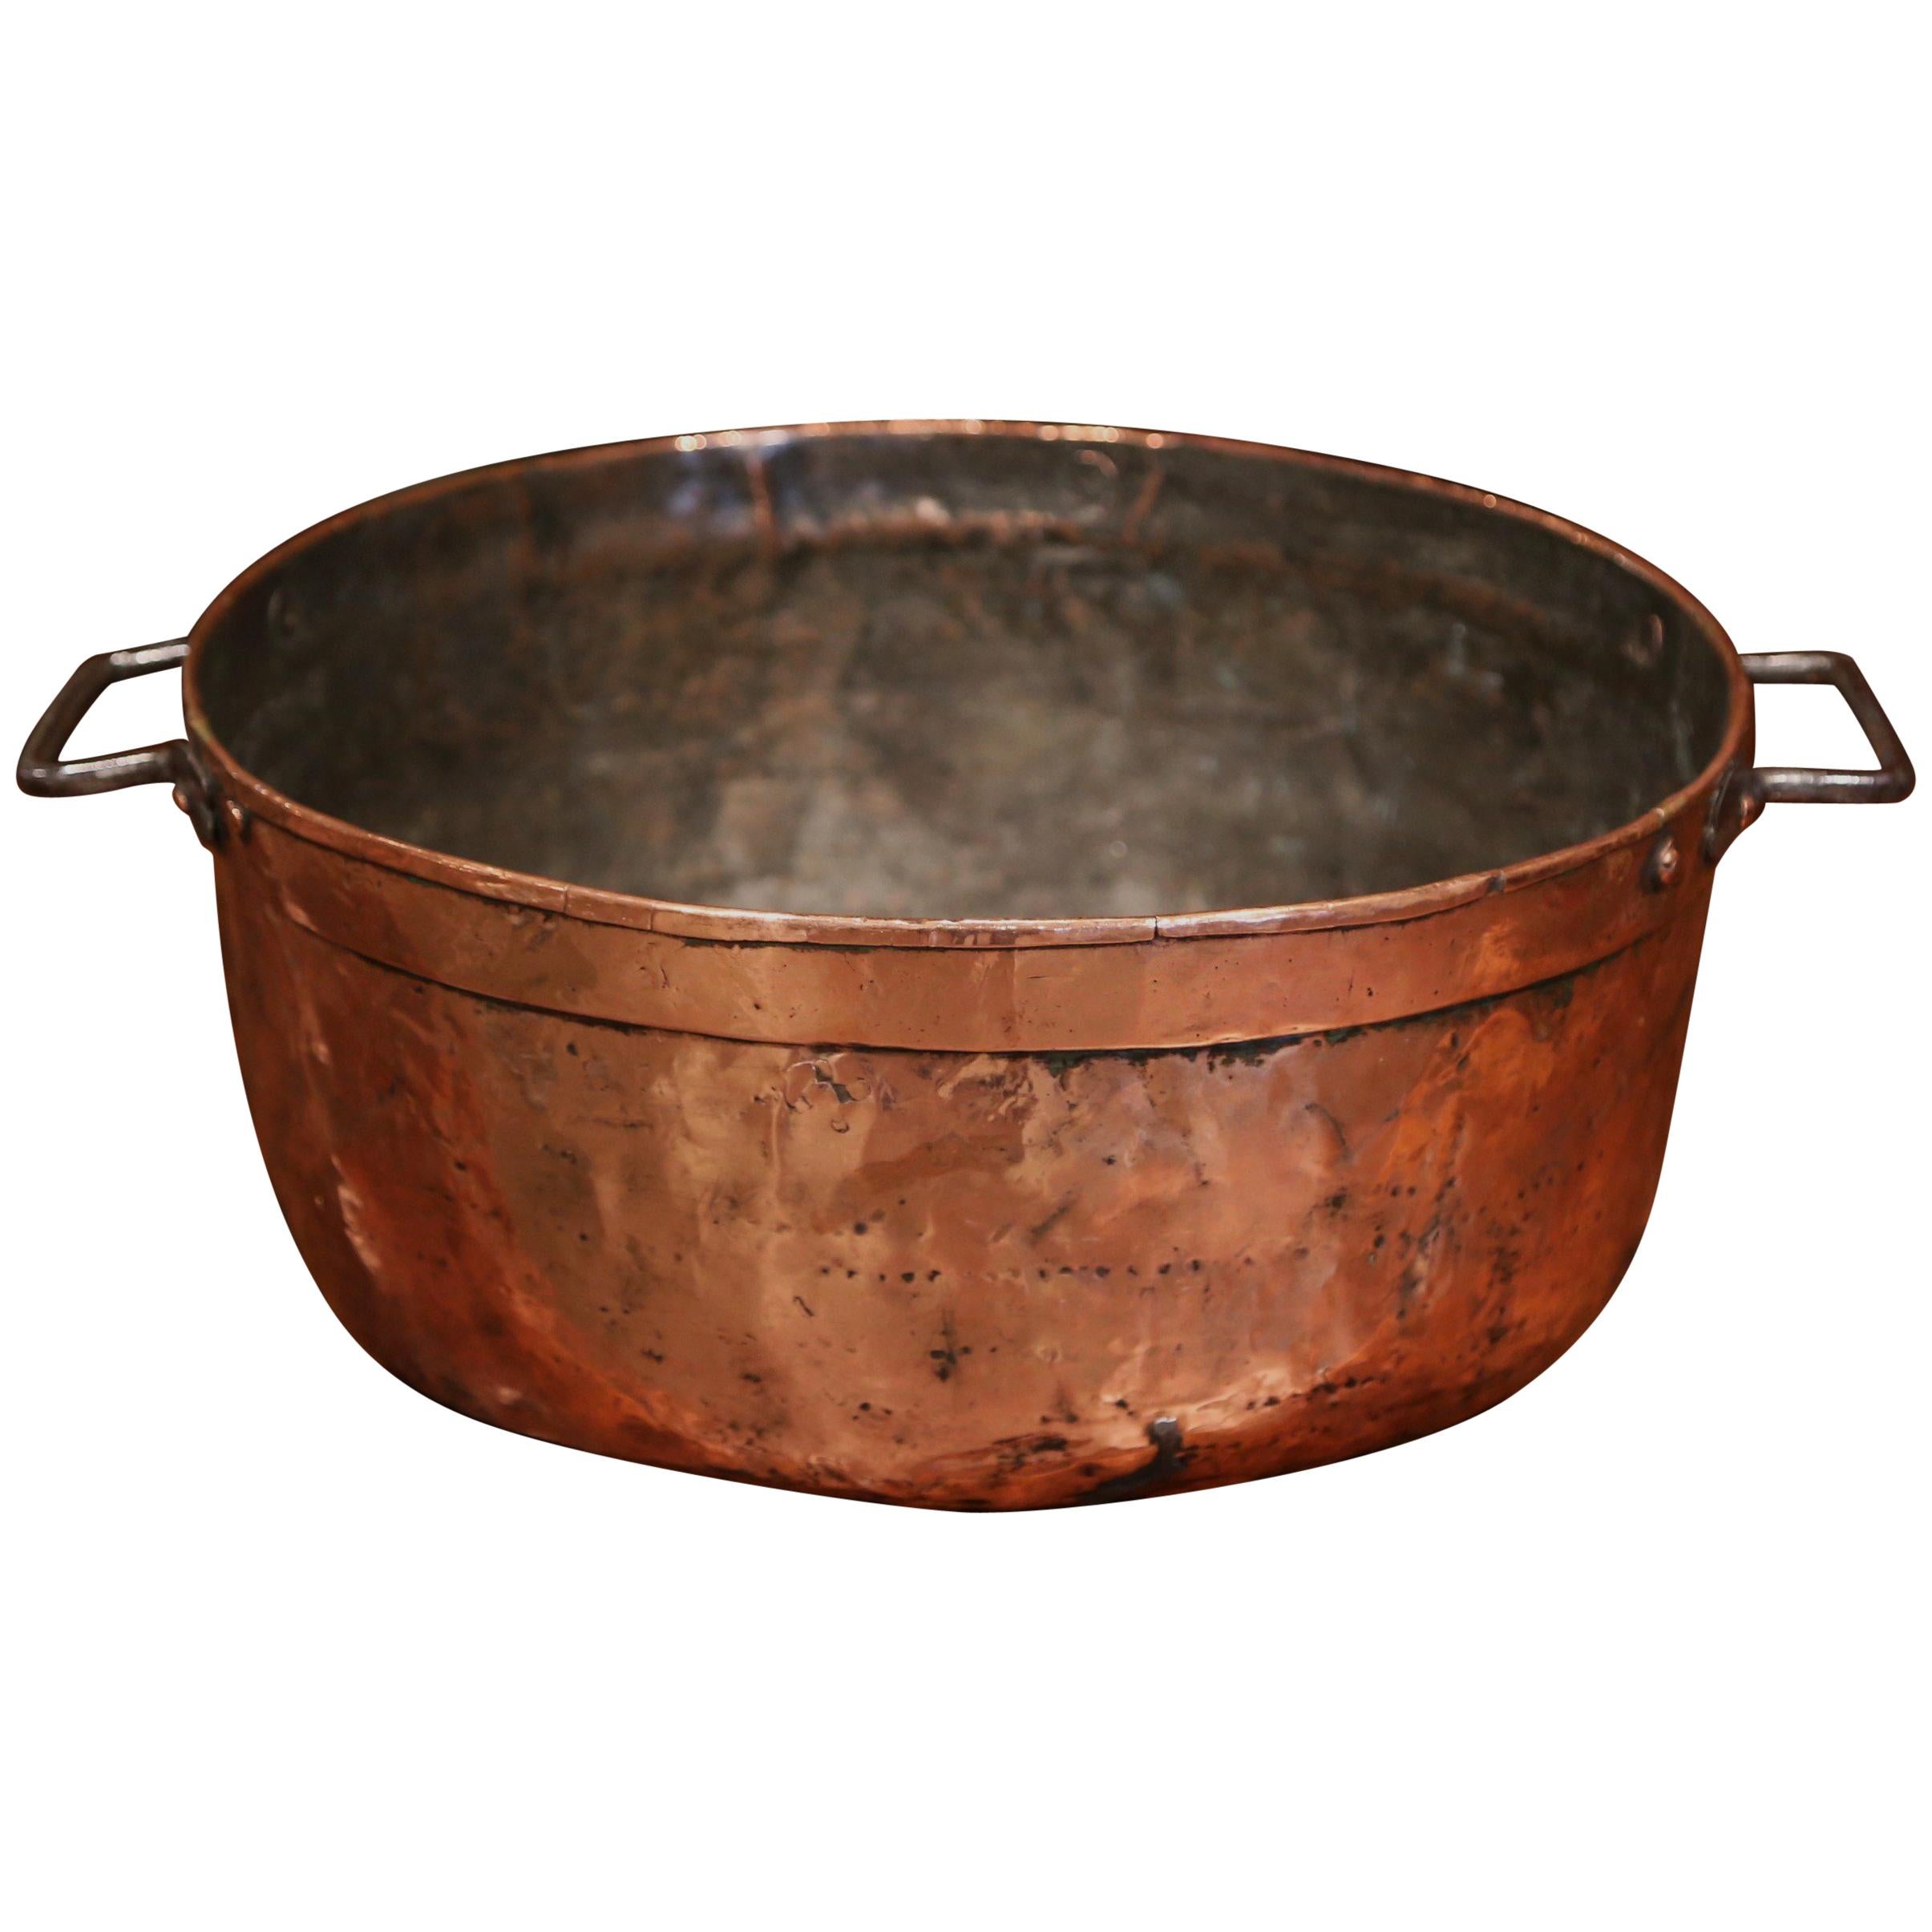 Mid-19th Century French Copper Jelly and Jam Boiling Bowl with Handles